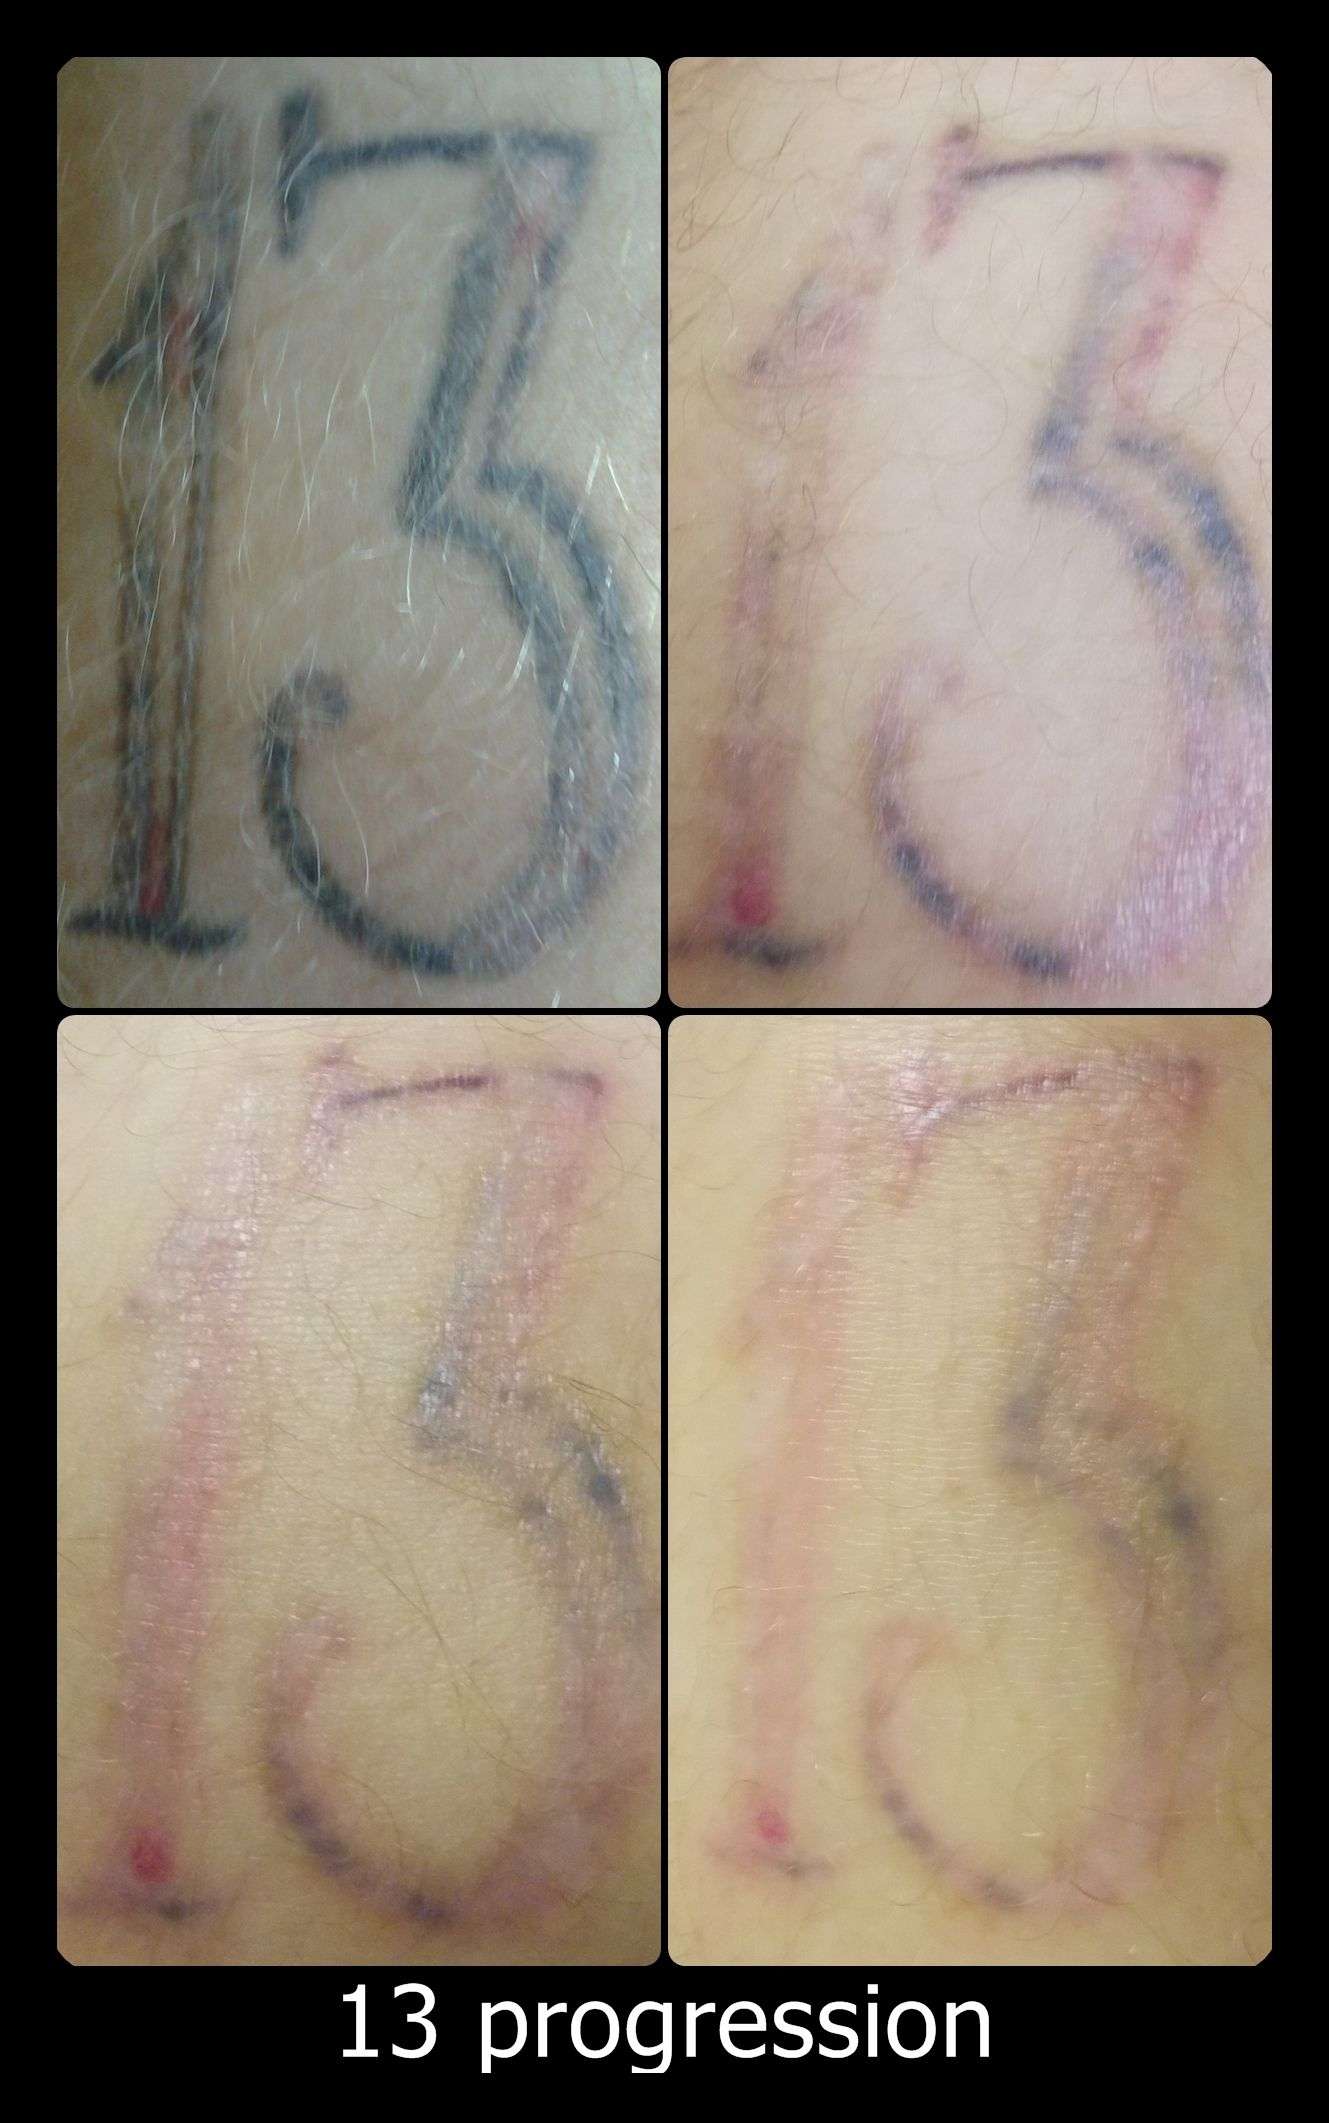 This tattoo had several treatments at another clinic before coming to ...